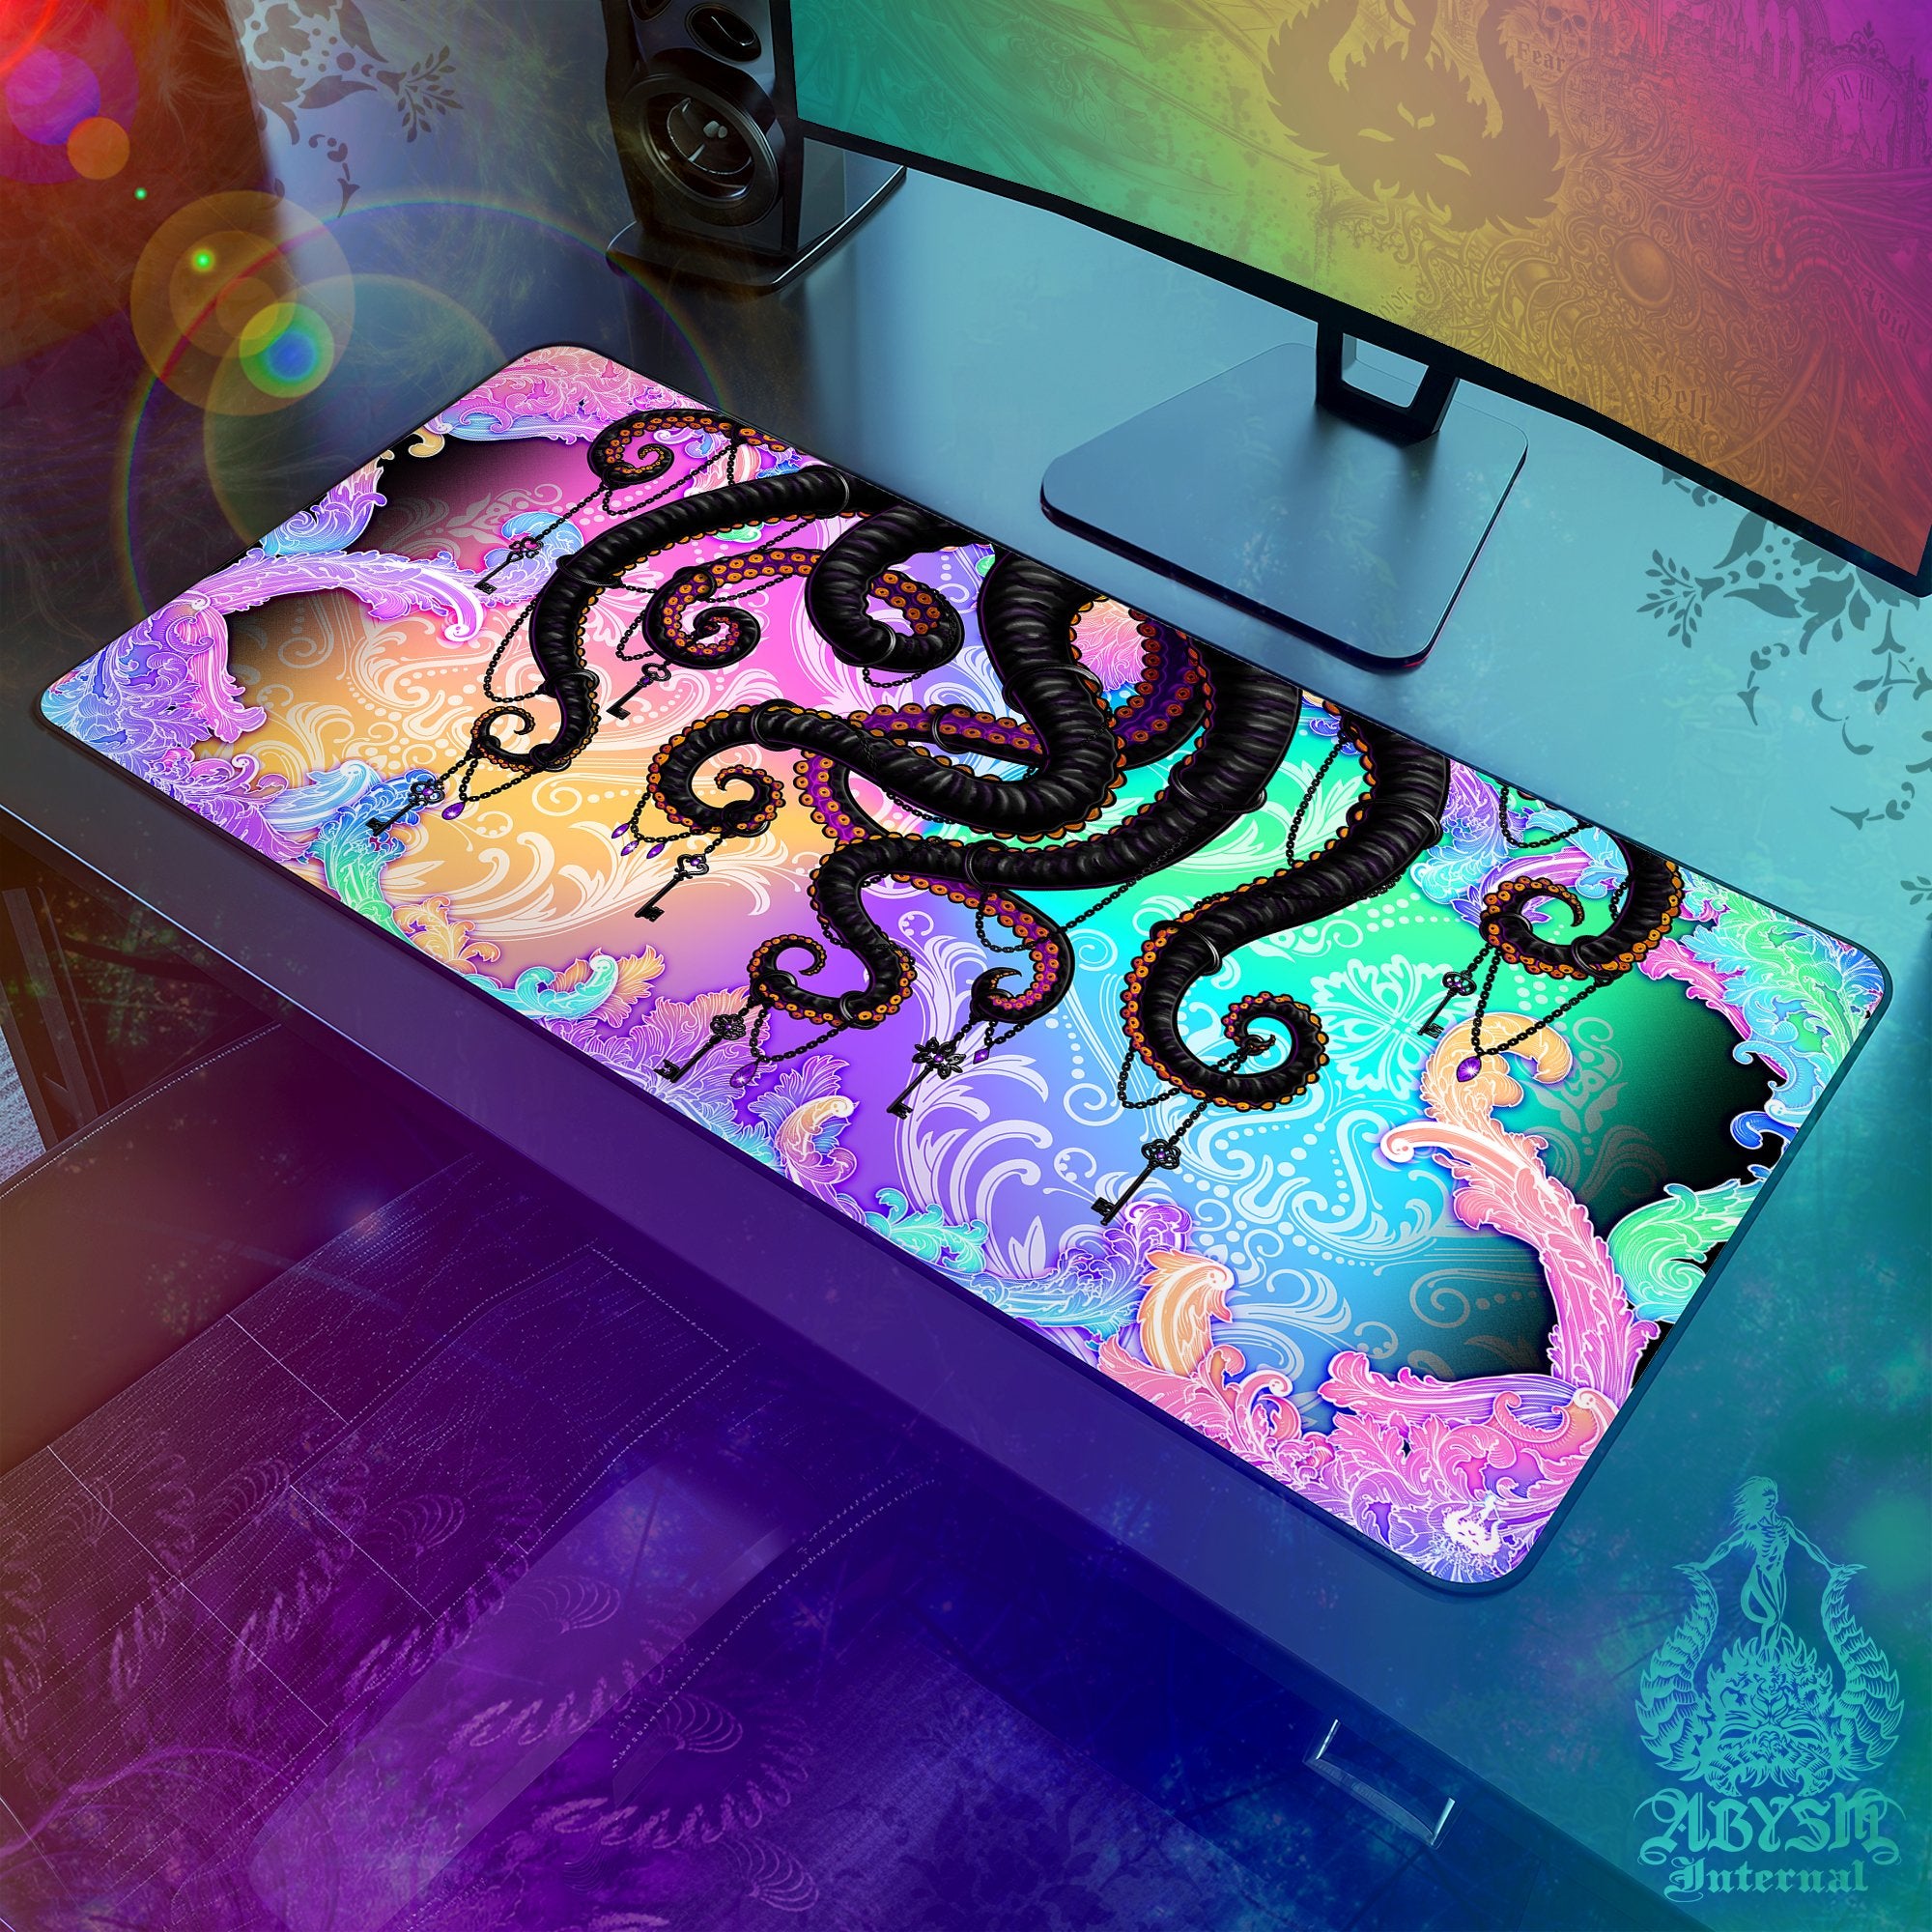 Psychedelic Desk Mat, Tentacles Gaming Mouse Pad, Girl Gamer Table Protector Cover, Trippy Workpad, Fantasy Art Print - Black Octopus - Abysm Internal